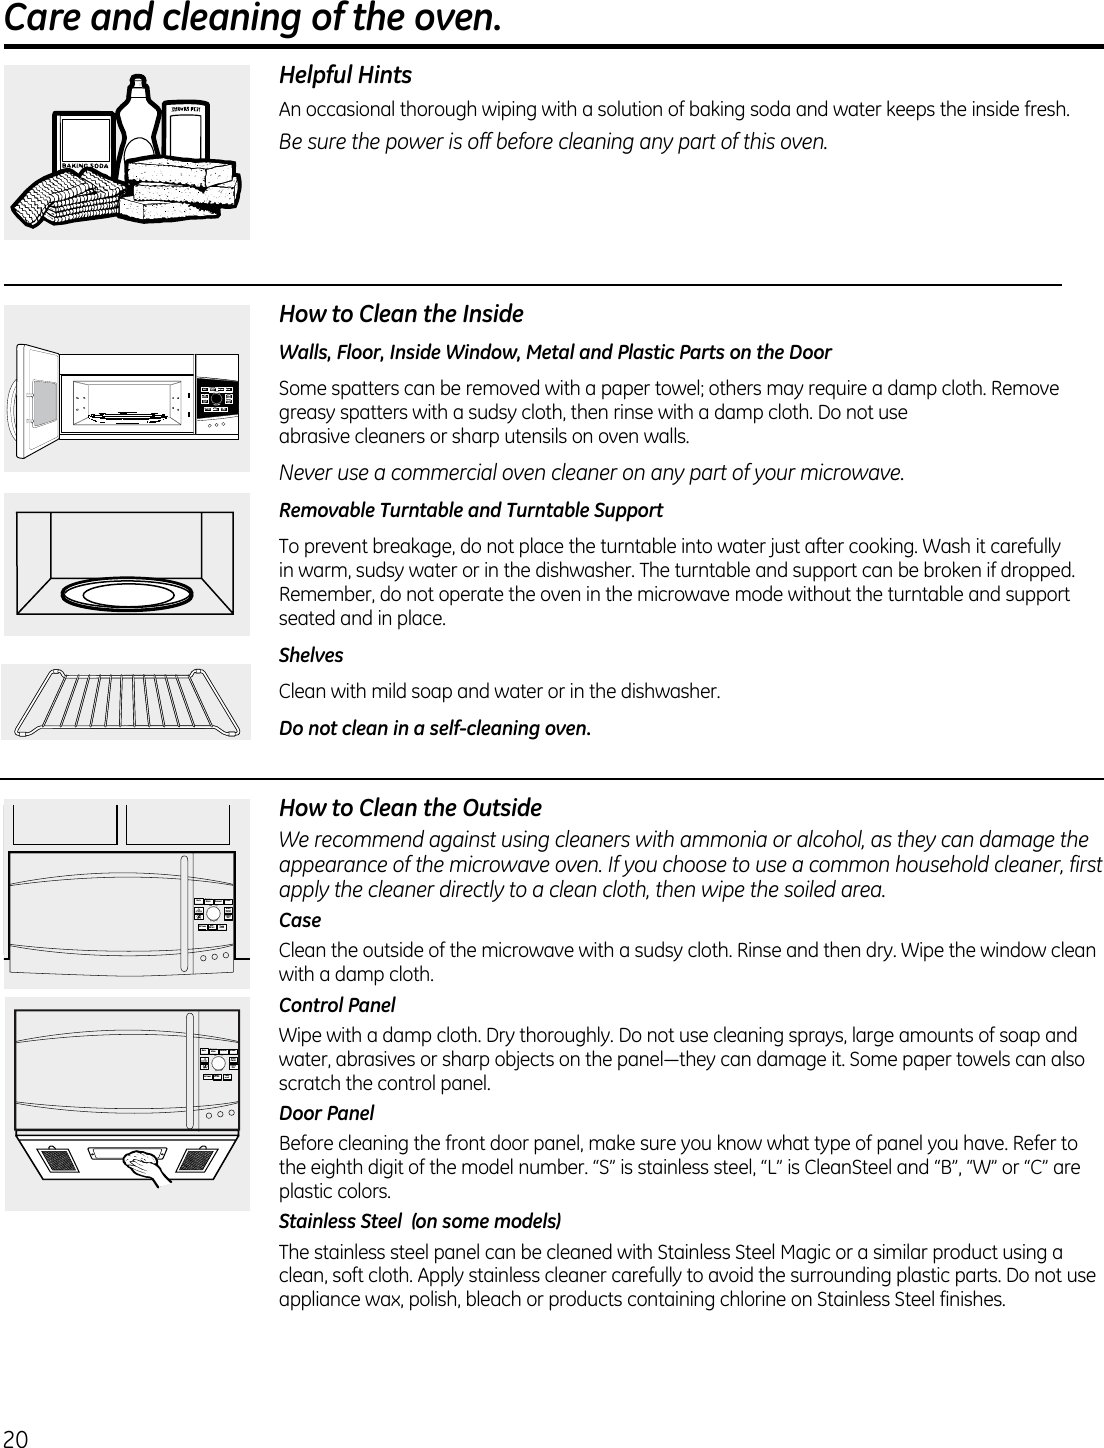 20 Care and cleaning of the oven.                                             Helpful HintsAn  occasional thorough wiping with a solution of baking soda and water keeps the inside fresh.Be sure the power is off before cleaning any part of this oven.How to Clean the InsideWalls, Floor, Inside Window, Metal and Plastic Parts on the DoorSome spatters can be removed with a paper towel; others may require a damp cloth. Remove greasy spatters with a sudsy cloth, then rinse with a damp cloth. Do not use  abrasive cleaners or sharp utensils on oven walls. Never use a commercial oven cleaner on any part of your microwave.Removable Turntable and Turntable Support To prevent breakage, do not place the turntable into water just after cooking. Wash it carefully in warm, sudsy water or in the dishwasher. The turntable and support can be broken if dropped. Remember, do not operate the oven in the microwave mode without the turntable and support seated and in place.ShelvesClean with mild soap and water or in the dishwasher.Do not clean in a self-cleaning oven.How to Clean the OutsideWe recommend against using cleaners with ammonia or alcohol, as they can damage the appearance of the microwave oven. If you choose to use a common household cleaner, first apply the cleaner directly to a clean cloth, then wipe the soiled area.CaseClean the outside of the microwave with a sudsy cloth. Rinse and then dry. Wipe the window clean with a damp cloth. Control PanelWipe with a damp cloth. Dry thoroughly. Do not use cleaning sprays, large amounts of soap and water,abrasivesorsharpobjectsonthepanel—theycandamageit.Somepapertowelscanalsoscratch the control panel.Door PanelBefore cleaning the front door panel, make sure you know what type of panel you have. Refer to the eighth digit of the model number. “S” is stainless steel, “L” is CleanSteel and “B”, “W” or “C” are plastic colors.Stainless Steel  (on some models)The stainless steel panel can be cleaned with Stainless Steel Magic or a similar product using a clean, soft cloth. Apply stainless cleaner carefully to avoid the surrounding plastic parts. Do not use appliance wax, polish, bleach or products containing chlorine on Stainless Steel finishes. TIMERon/offSETTINGS ADD30 SECSTARTPAUSECANCELOFFDEFROSTBACK COOKINGMENU STEAMTURN TO SELECT      PRESS TO ENTERTIMERon/offSETTINGS ADD30 SECSTARTPAUSECANCELOFFDEFROSTBACK COOKINGMENU STEAMTURN TO SELECT      PRESS TO ENTERTIMERon/offSETTINGSADD30 SECSTARTPAUSECANCELOFFDEFROSTBACKCOOKINGMENUSTEAMTURN TO SELECT      PRESS TO ENTER